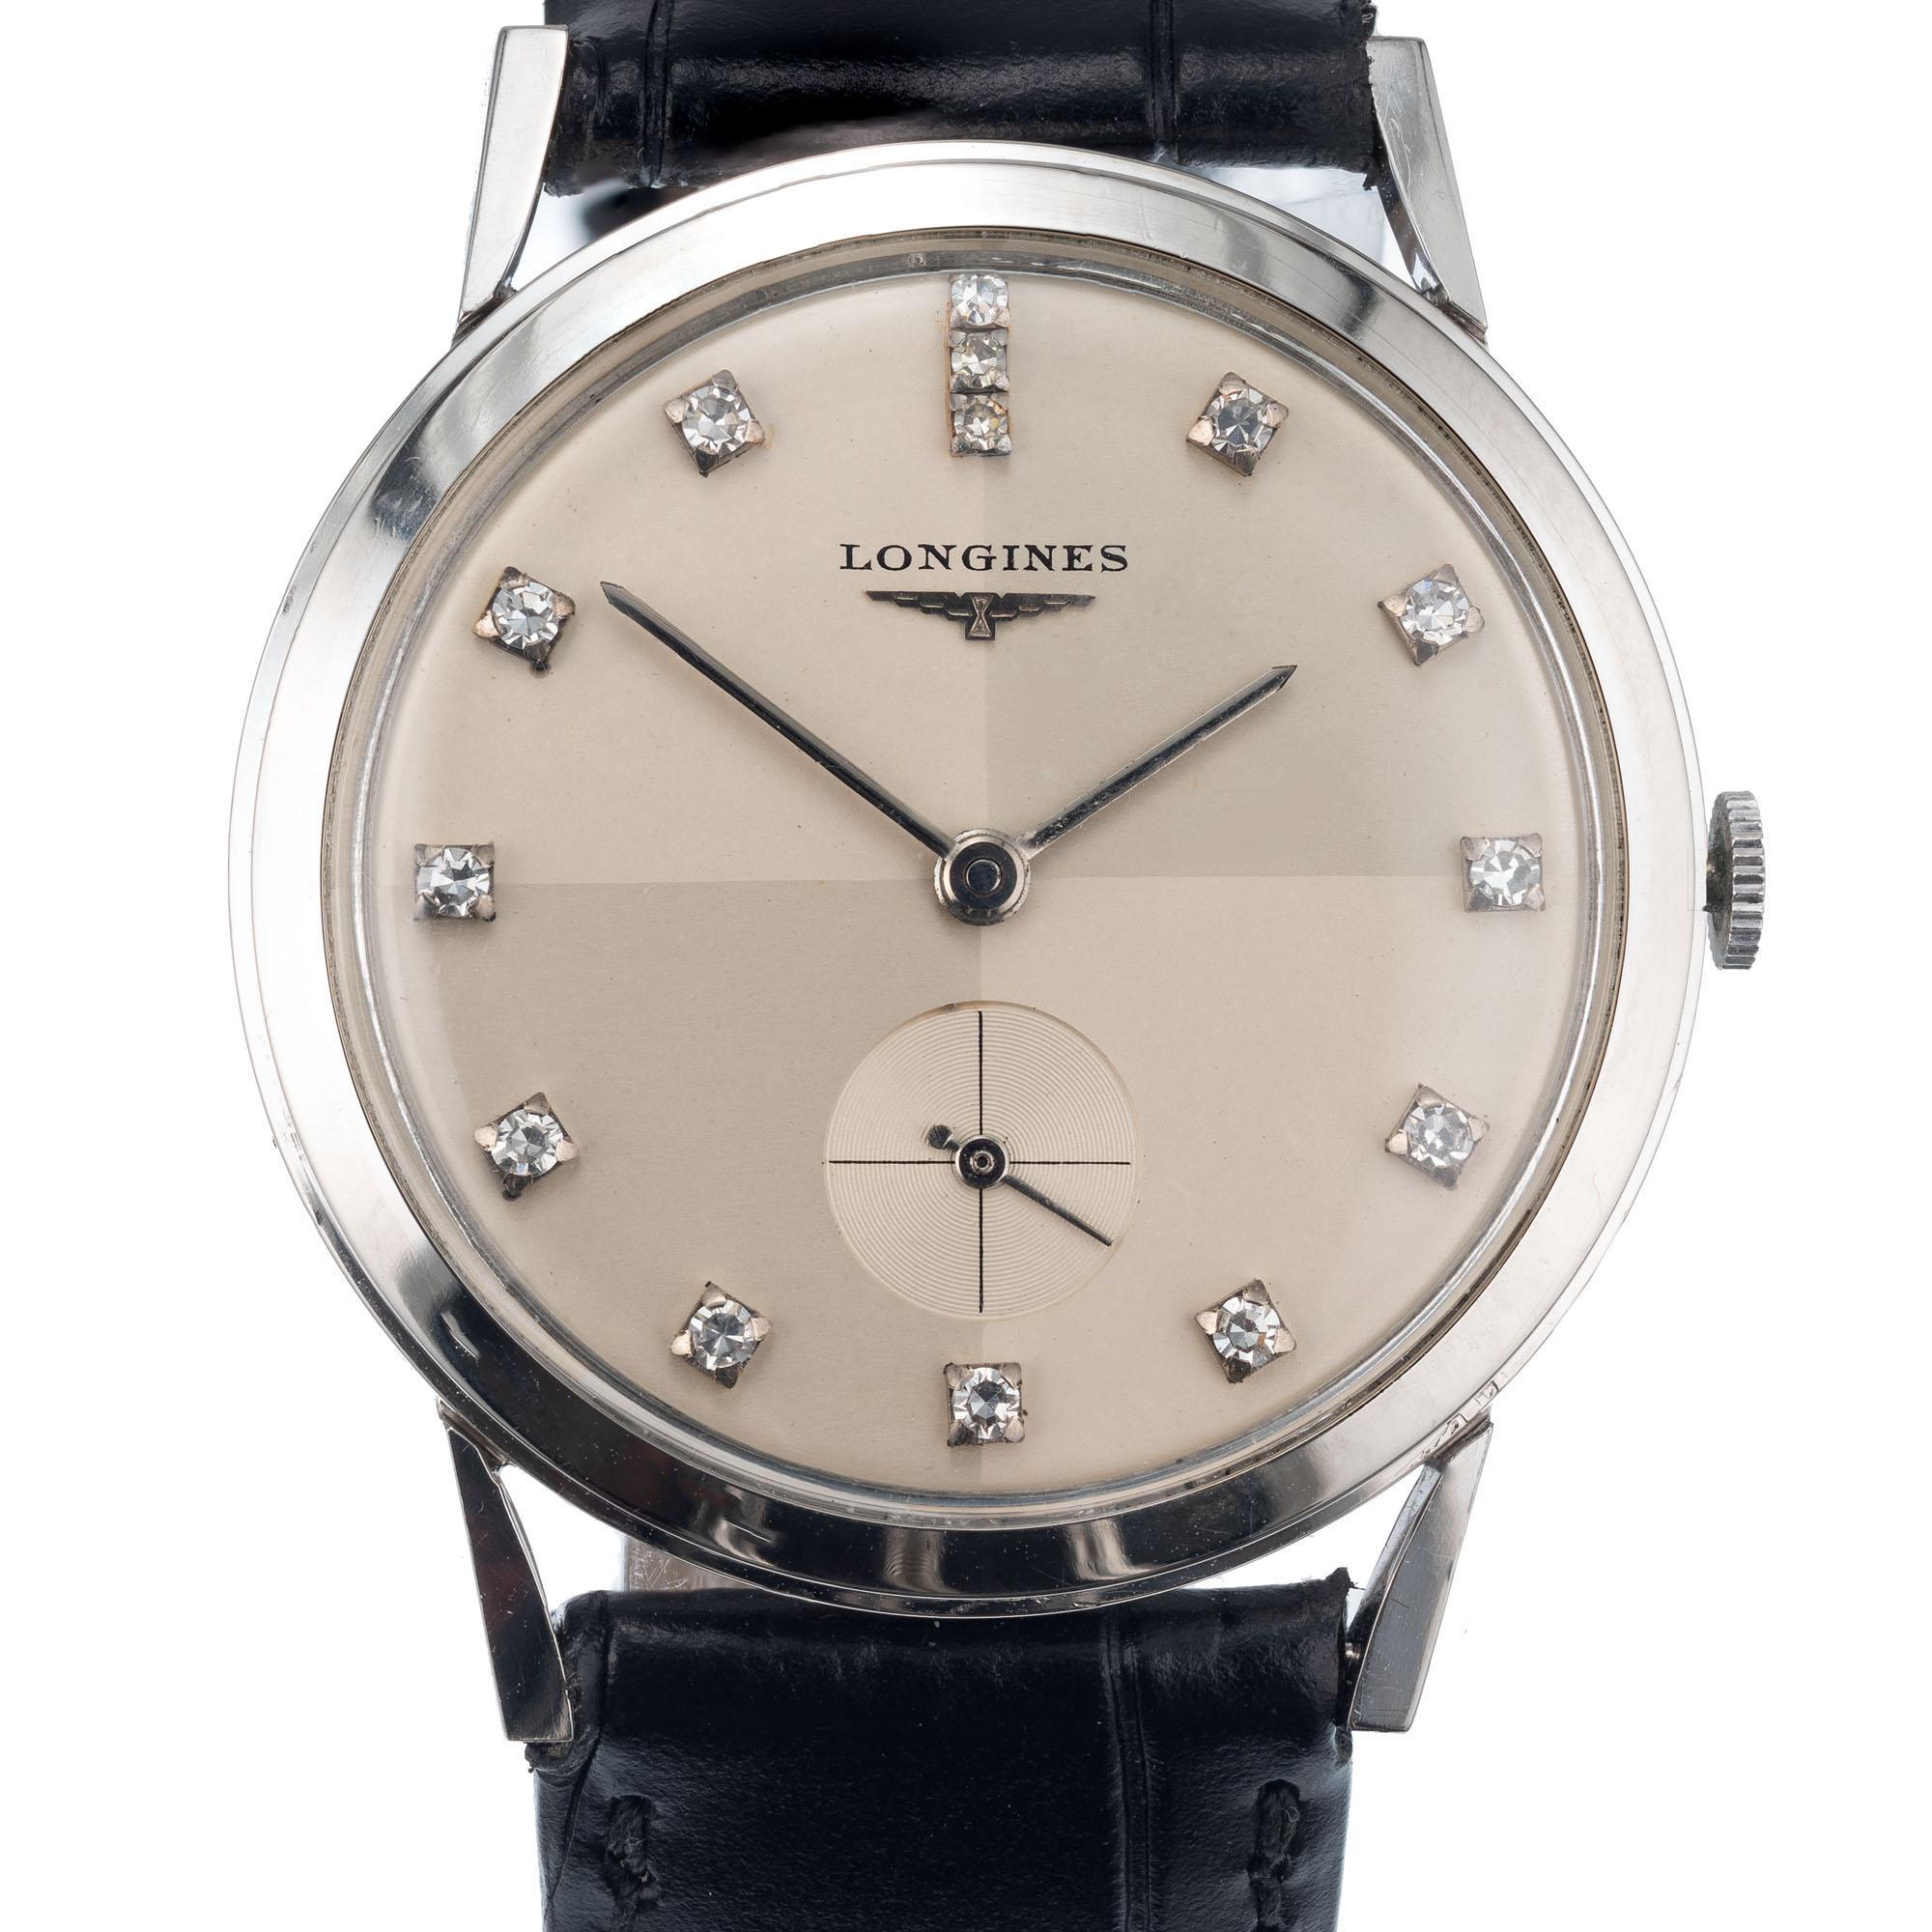 Longines Vintage 1960's round wristwatch in a solid white gold case with factory diamond dial. Manual wind

Length: 37.72mm
Width: 32mm
Band width at case: 18mm
Case thickness: 8.06mm
Band: black genuine leather
Crystal: Acrylic
Dial: cream/ diamond